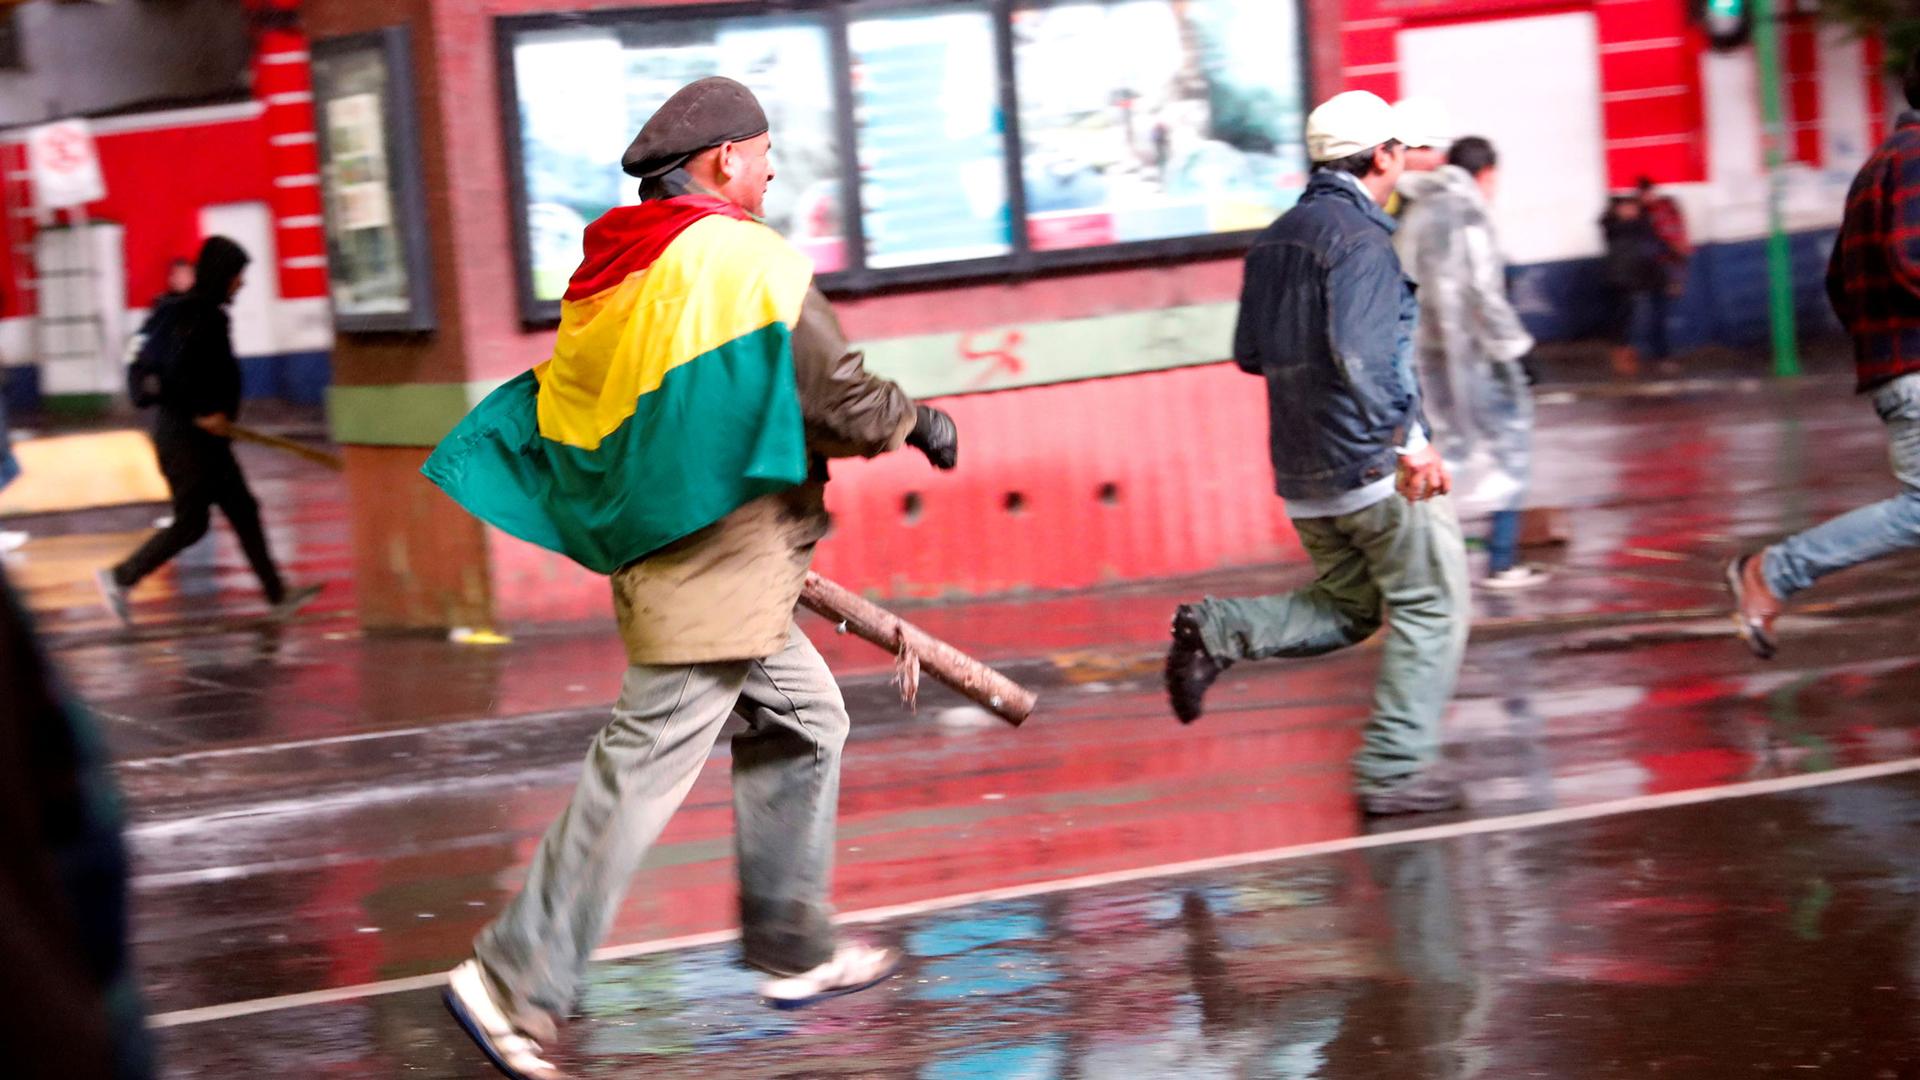 Several people are shown running in the street with one man draped in a Bolivian flag.